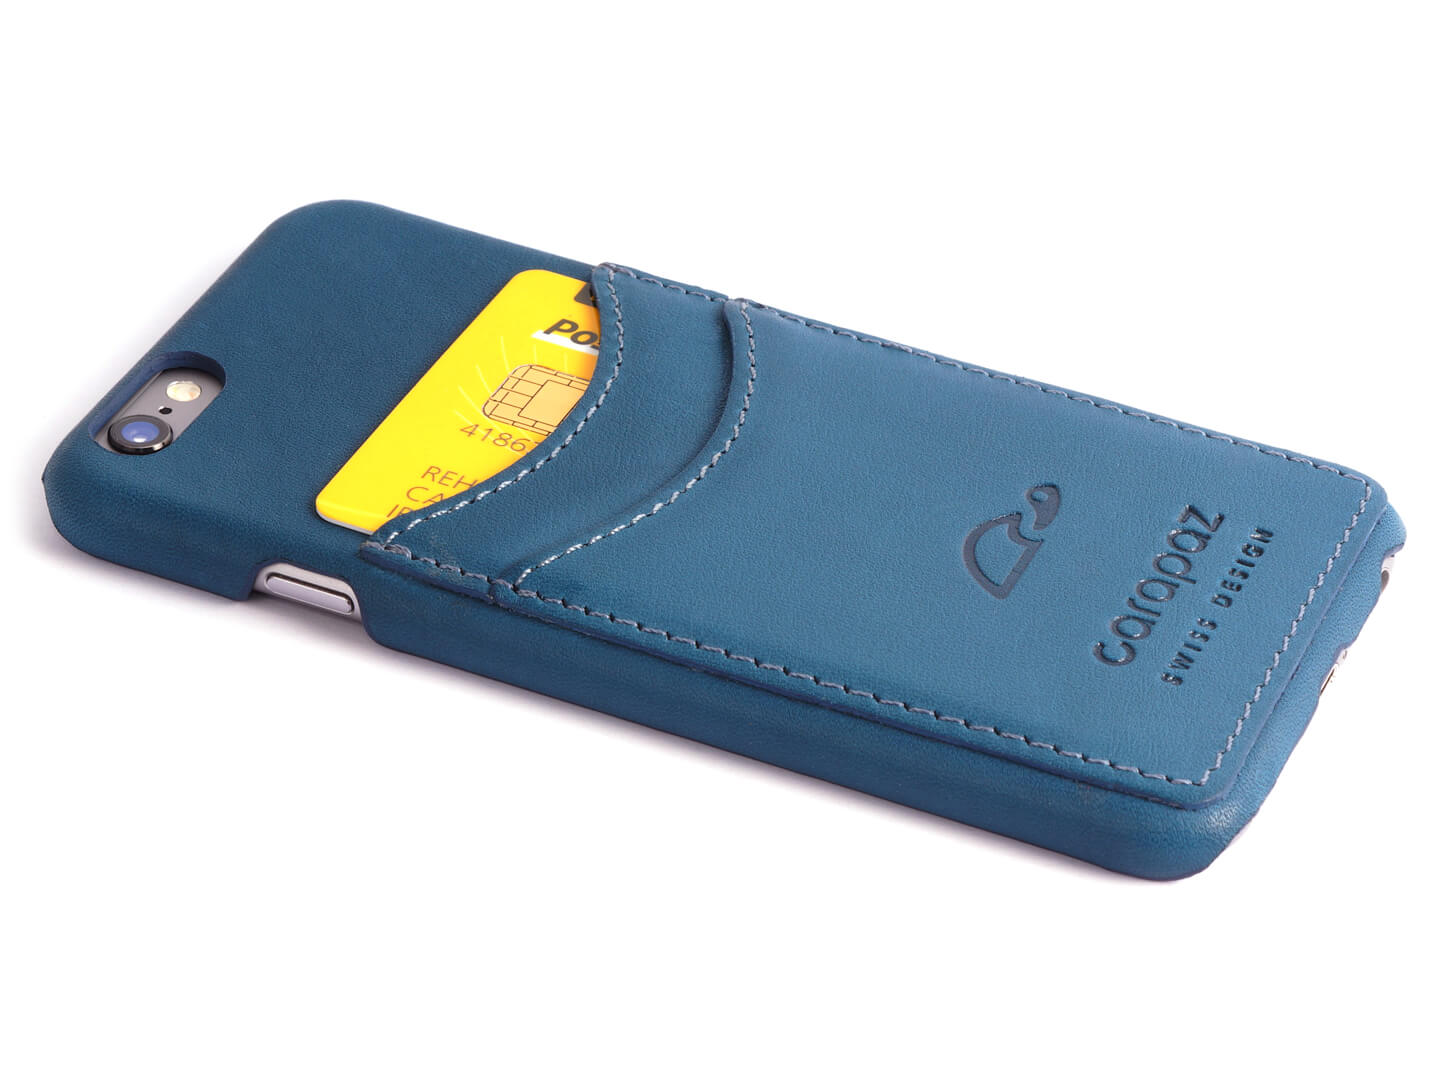 iPhone 6 / 6S Slim case - blue leather wallet case - credit cards - Carapaz